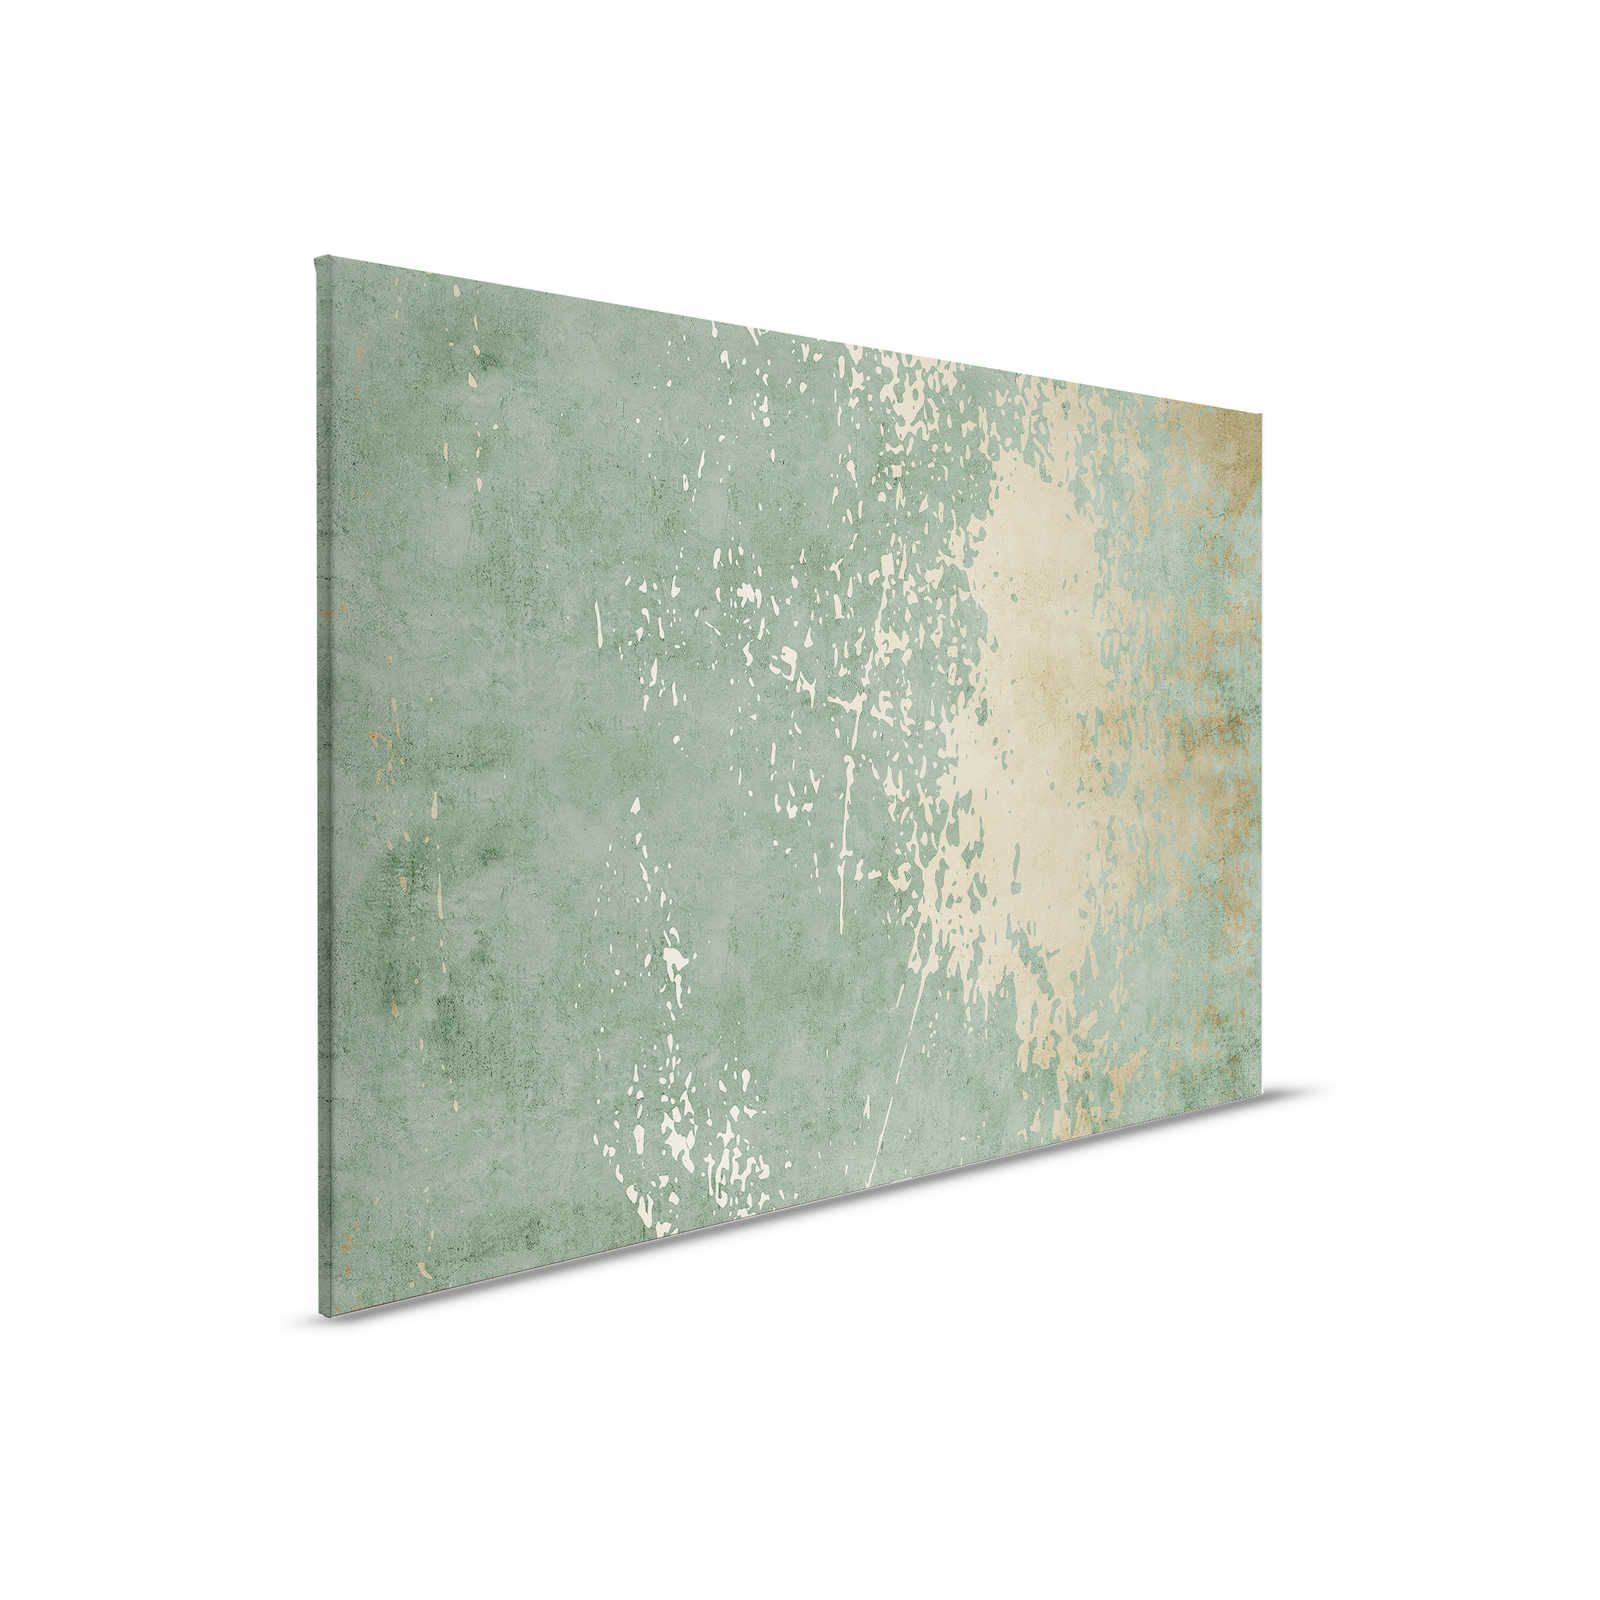         Vintage Wall 1 - Canvas painting sage green & gold plaster look in used look - 0.90 m x 0.60 m
    